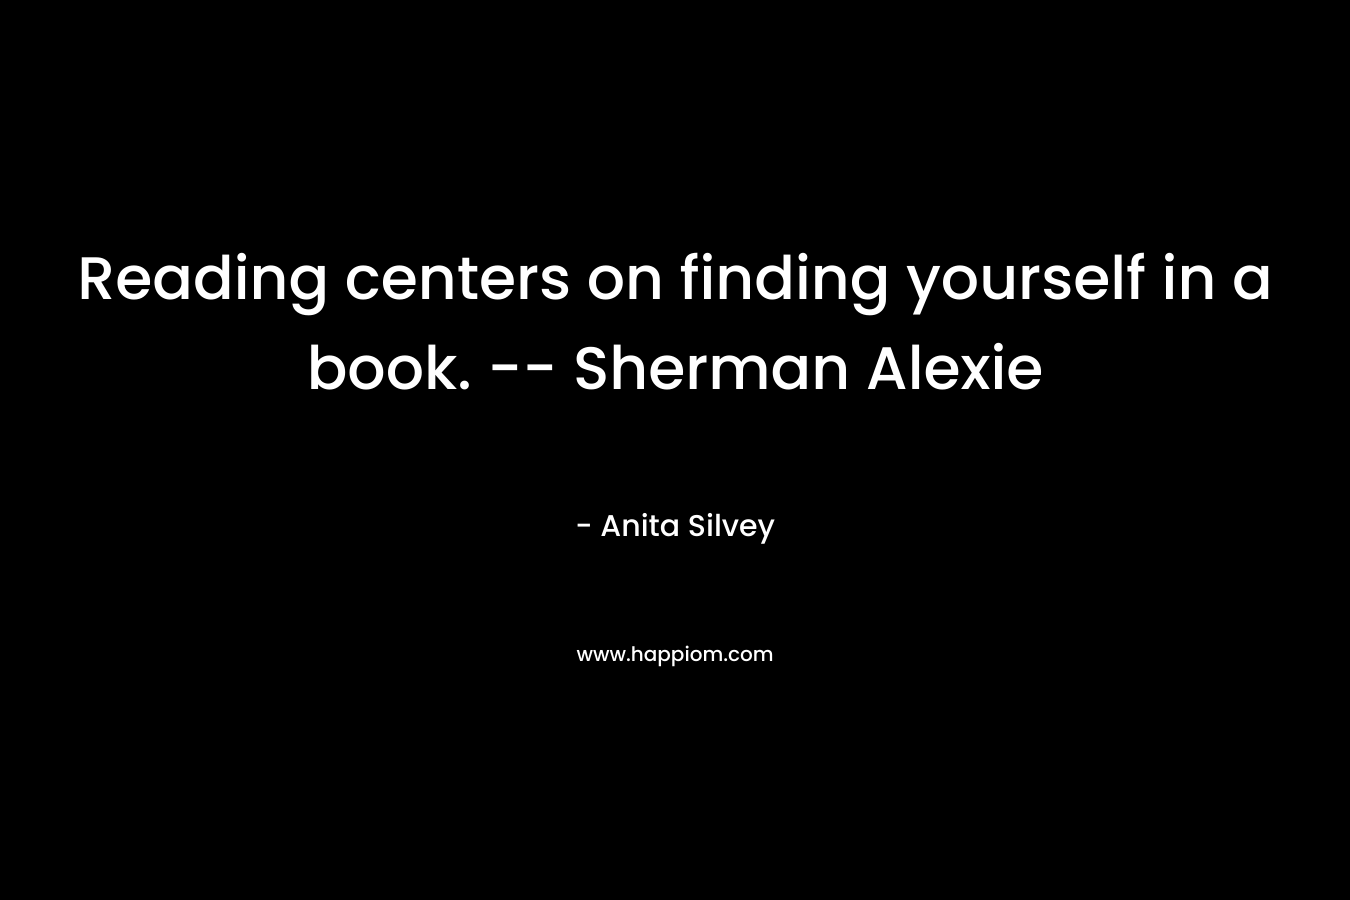 Reading centers on finding yourself in a book. — Sherman Alexie – Anita Silvey